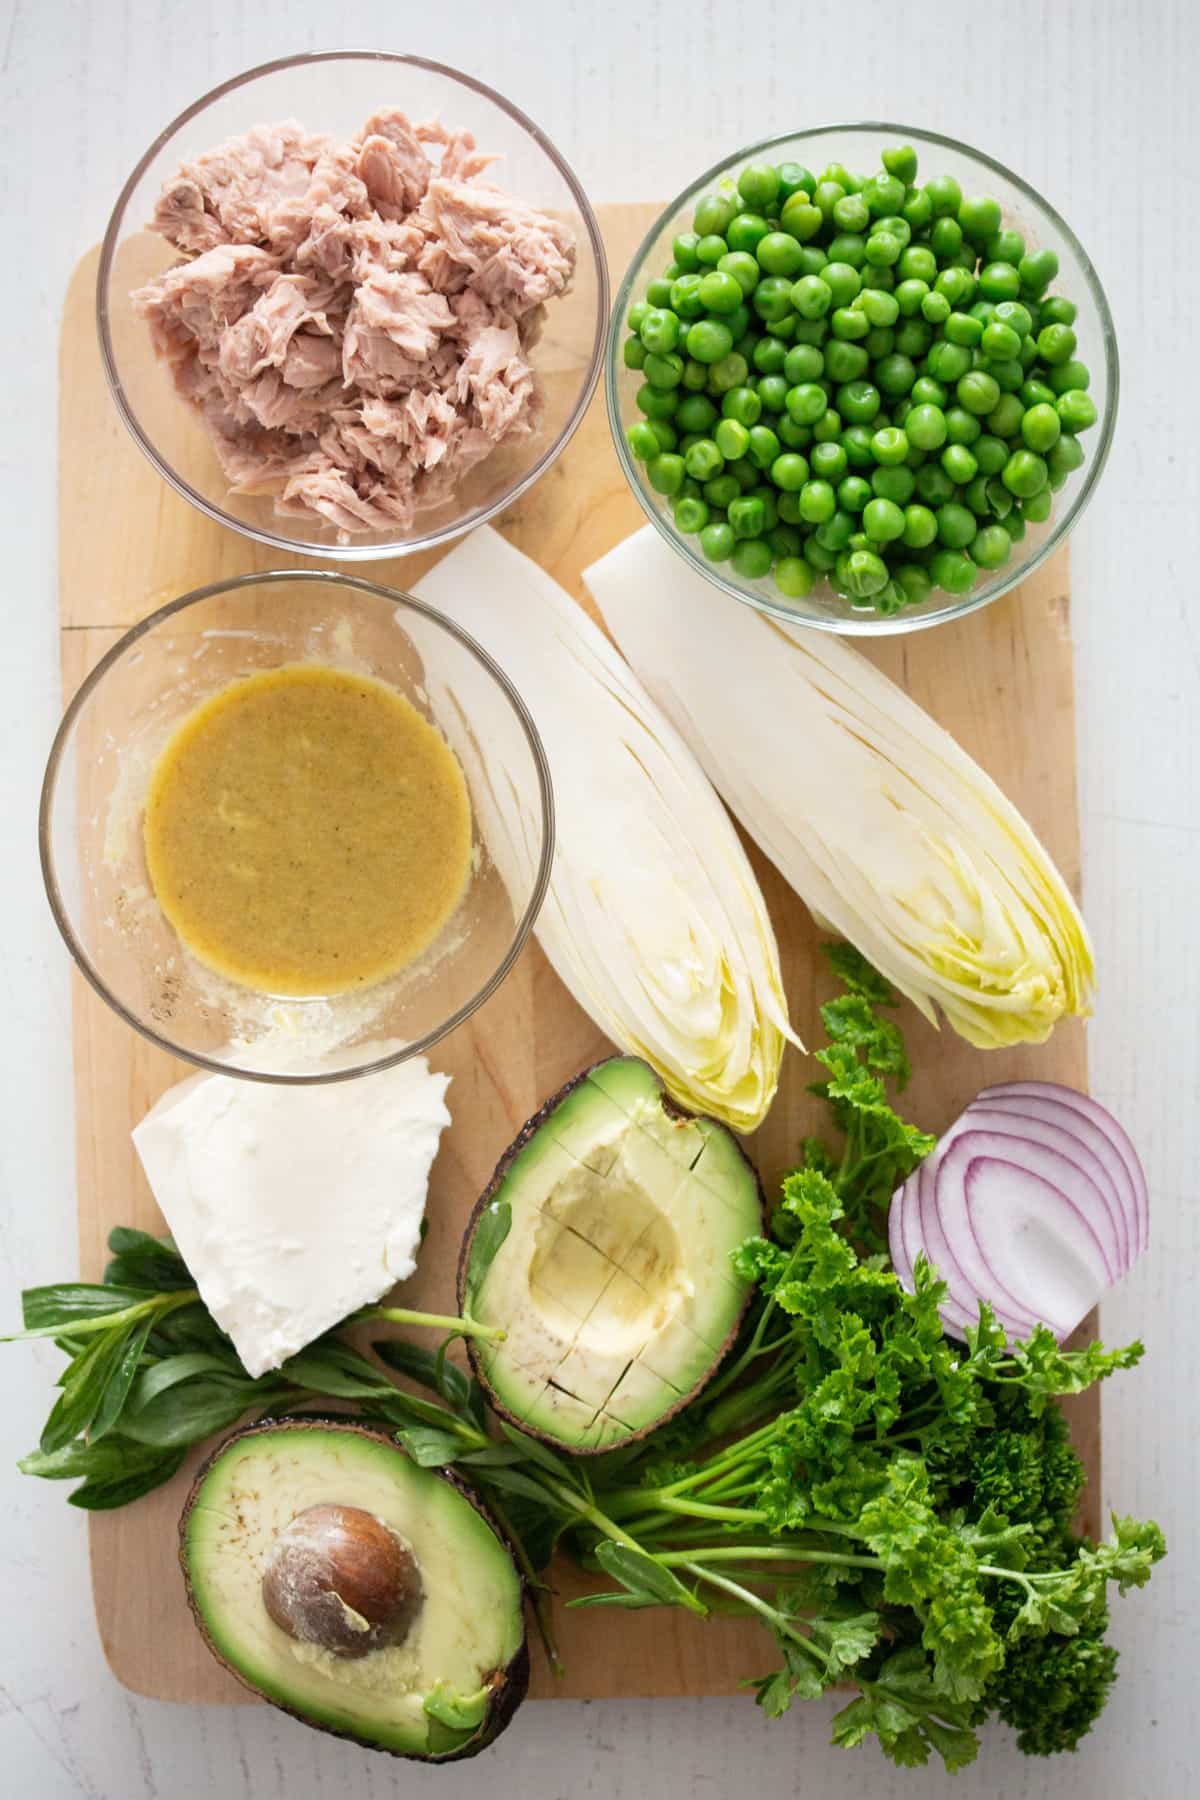 ingredients for tuna feta pea salad on a wooden board.